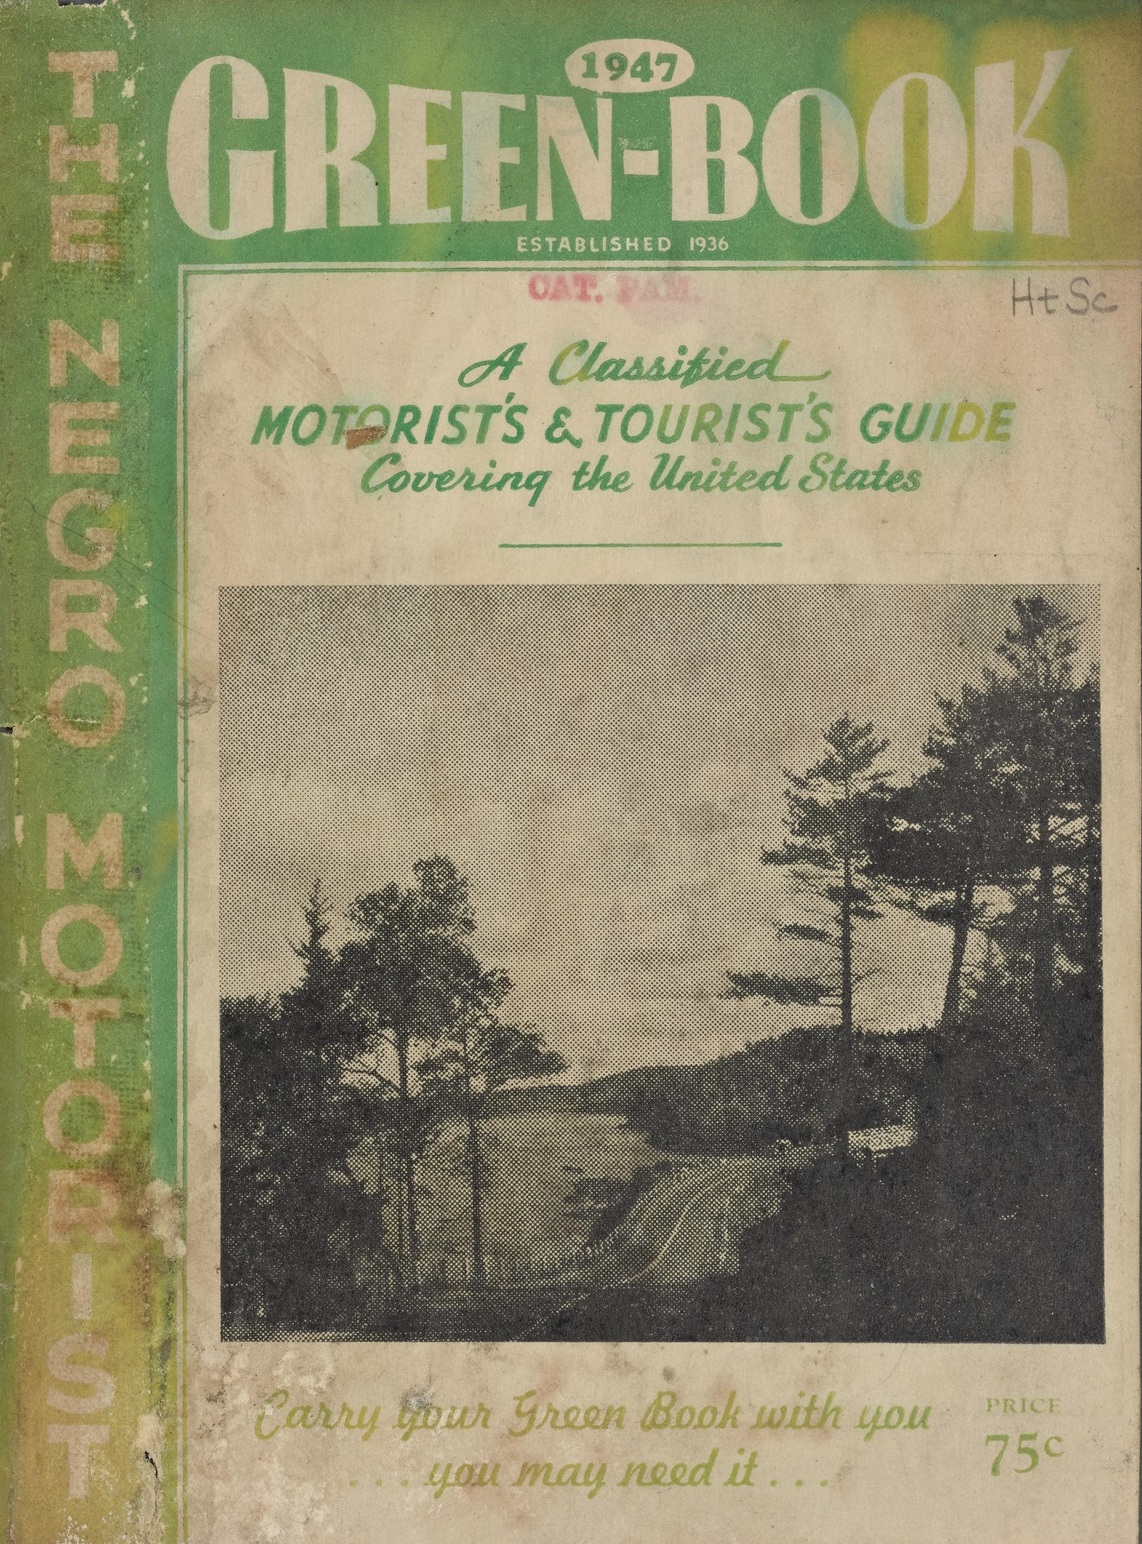 <em>The Green Book</em> cover, 1947. <em>Courtesy Schomburg Center for Research in Black Culture, Jean Blackwell Hutson Research and Reference Division, New York Public Library.</em>